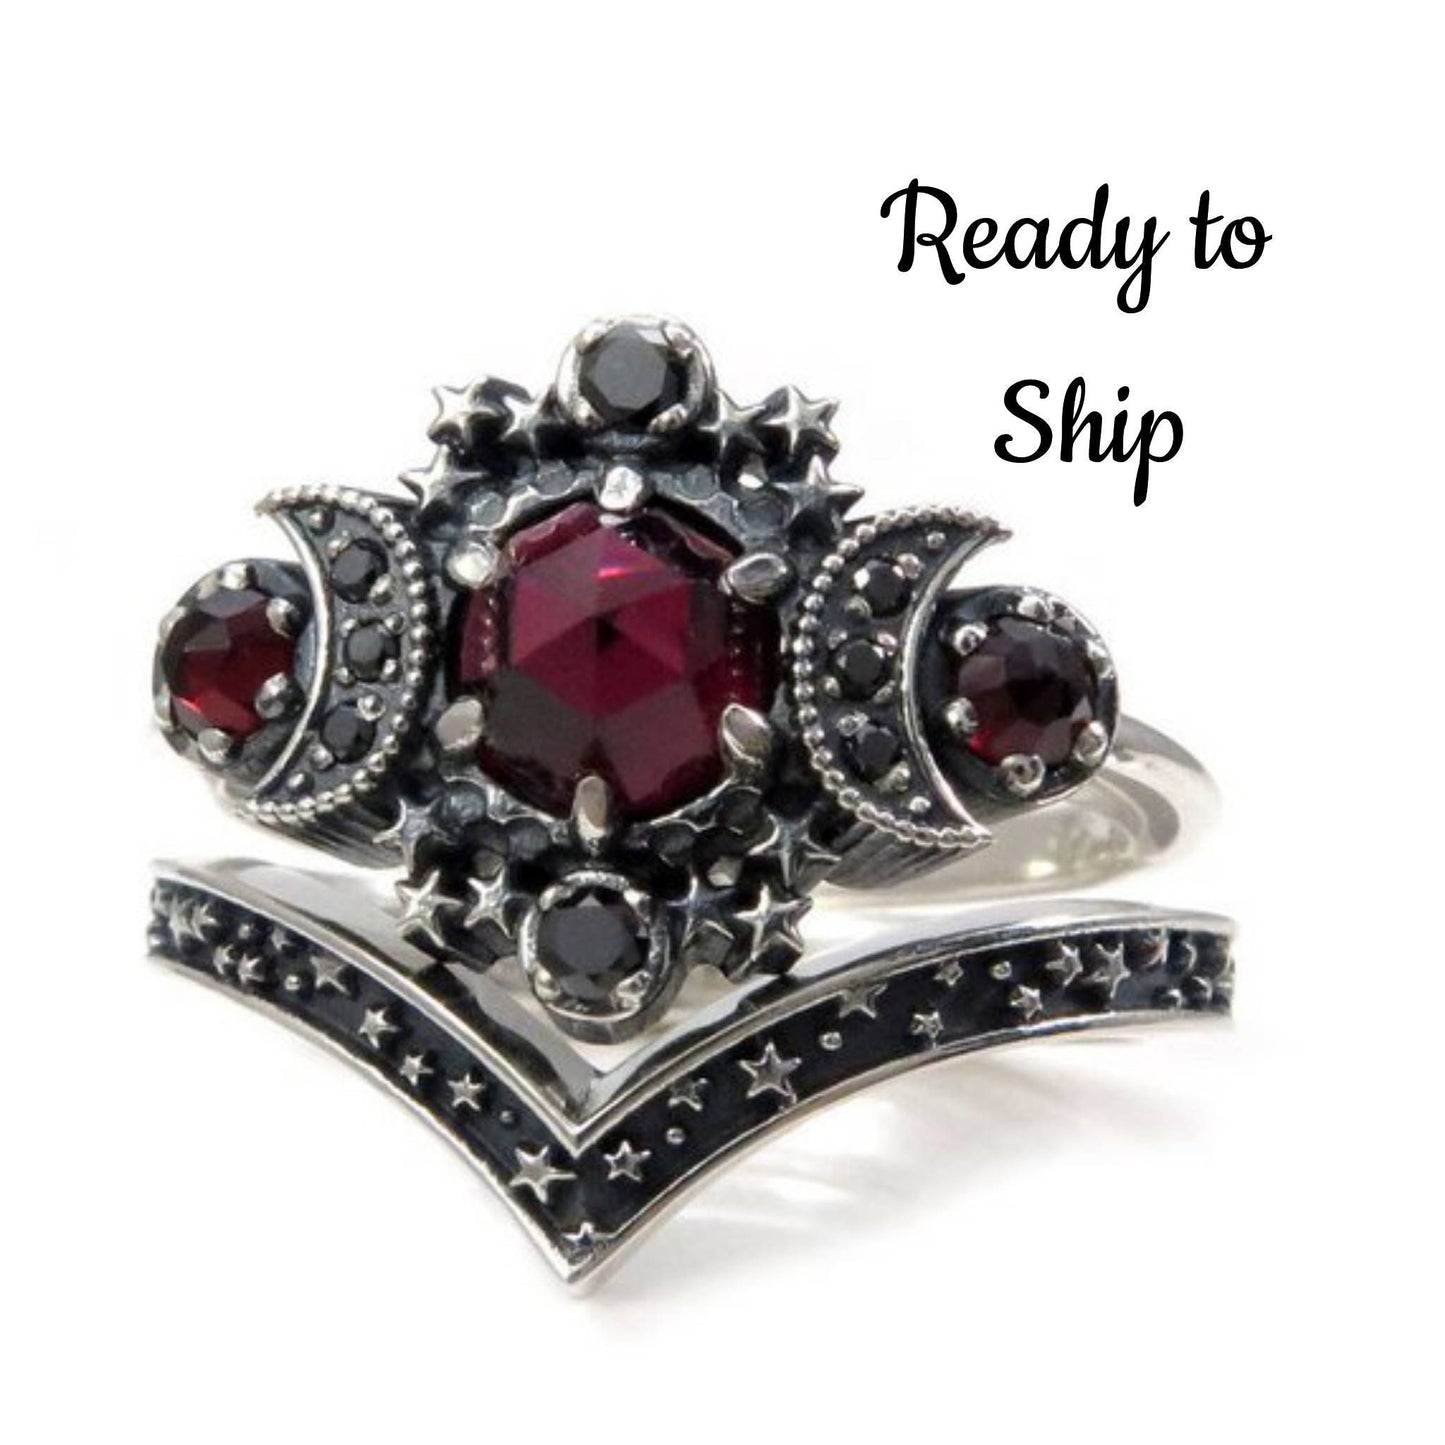 Ready to Ship Size 6 - 8  - Garnet Cosmos Moon Engagement Ring Set Triple Moon Goddess Silver Ring with  Stardust Chevron Wedding Band